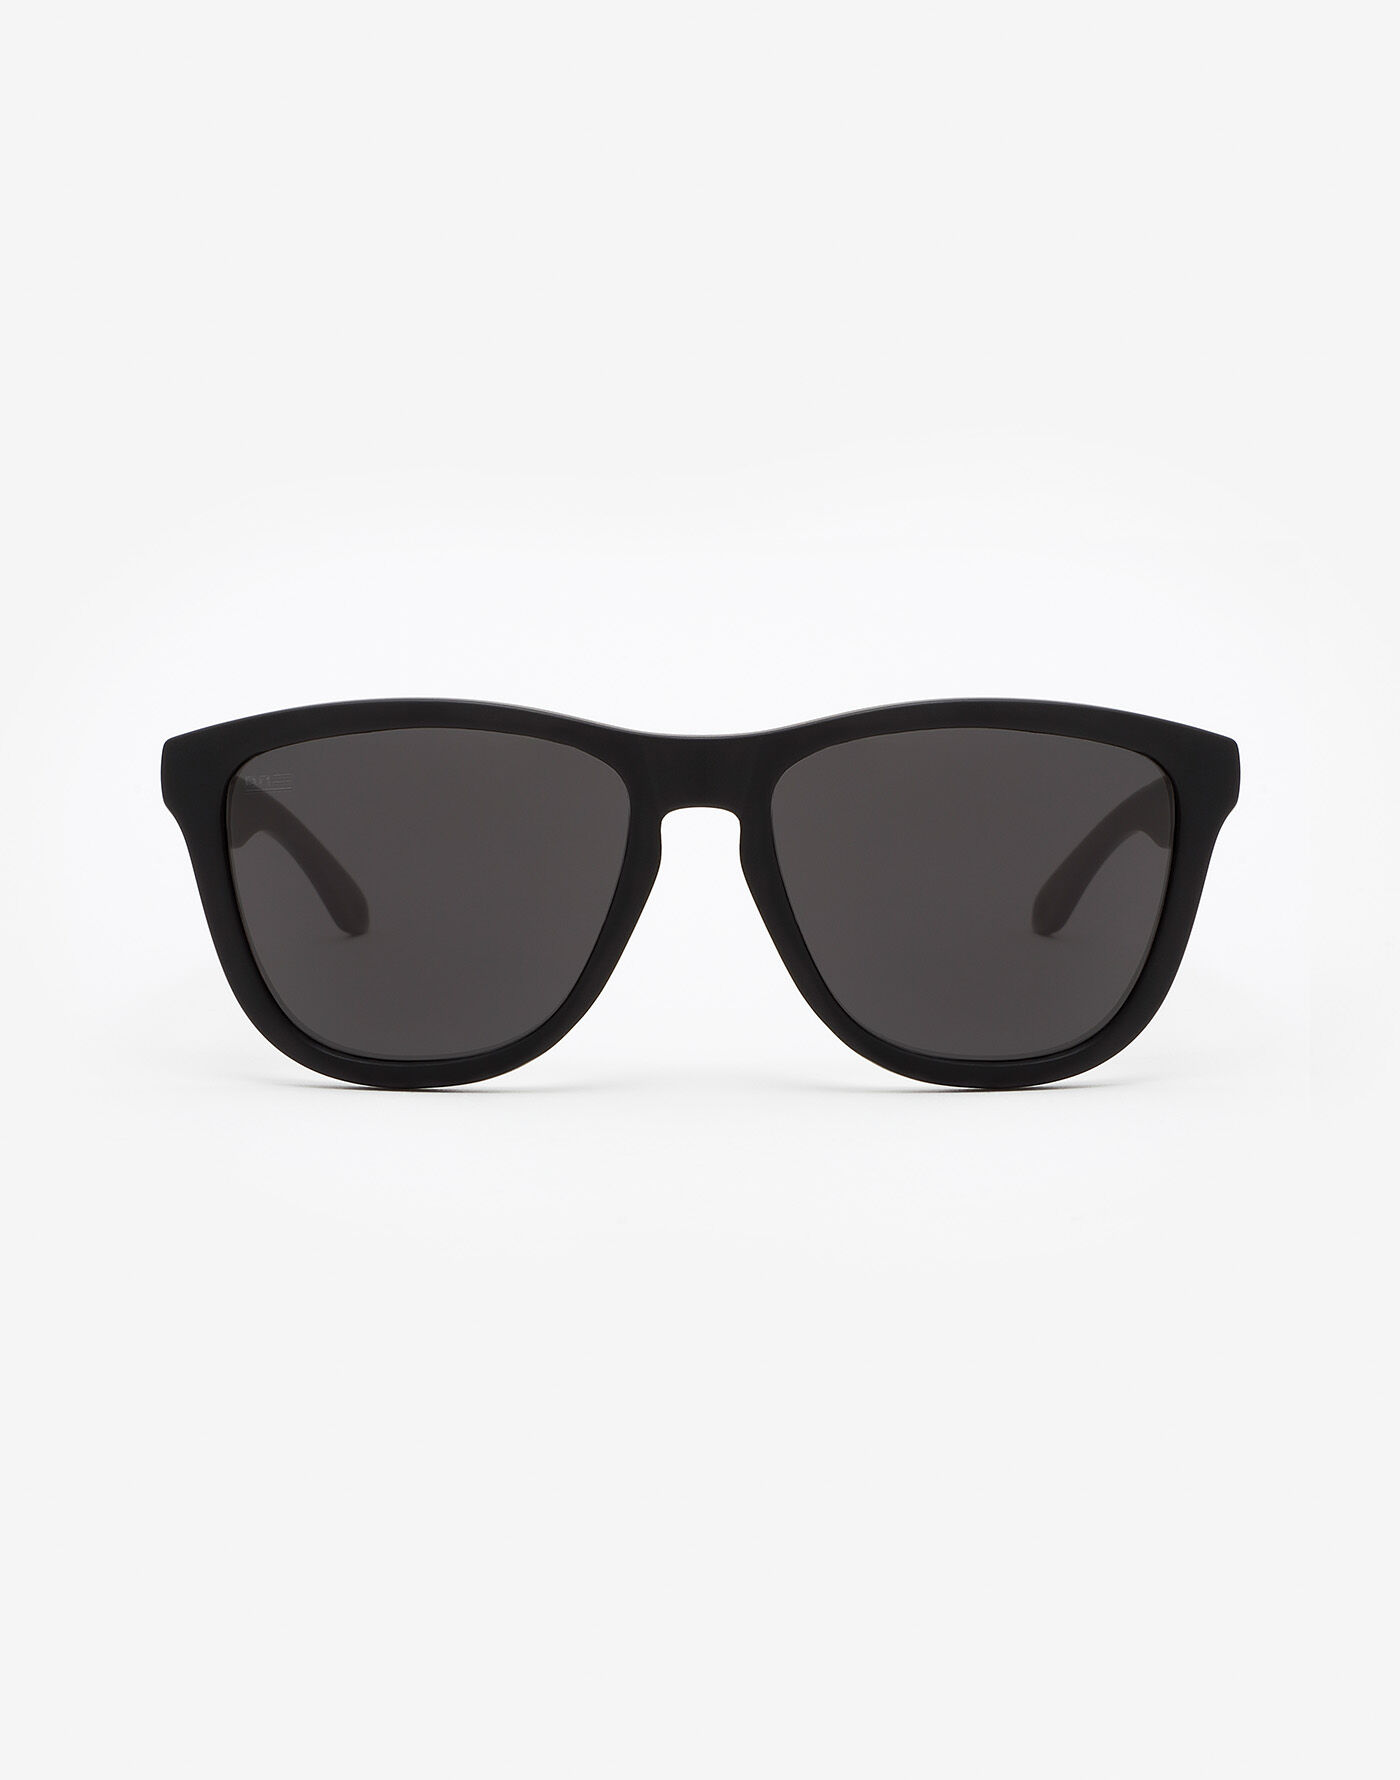 Hawkers One Sunglasses